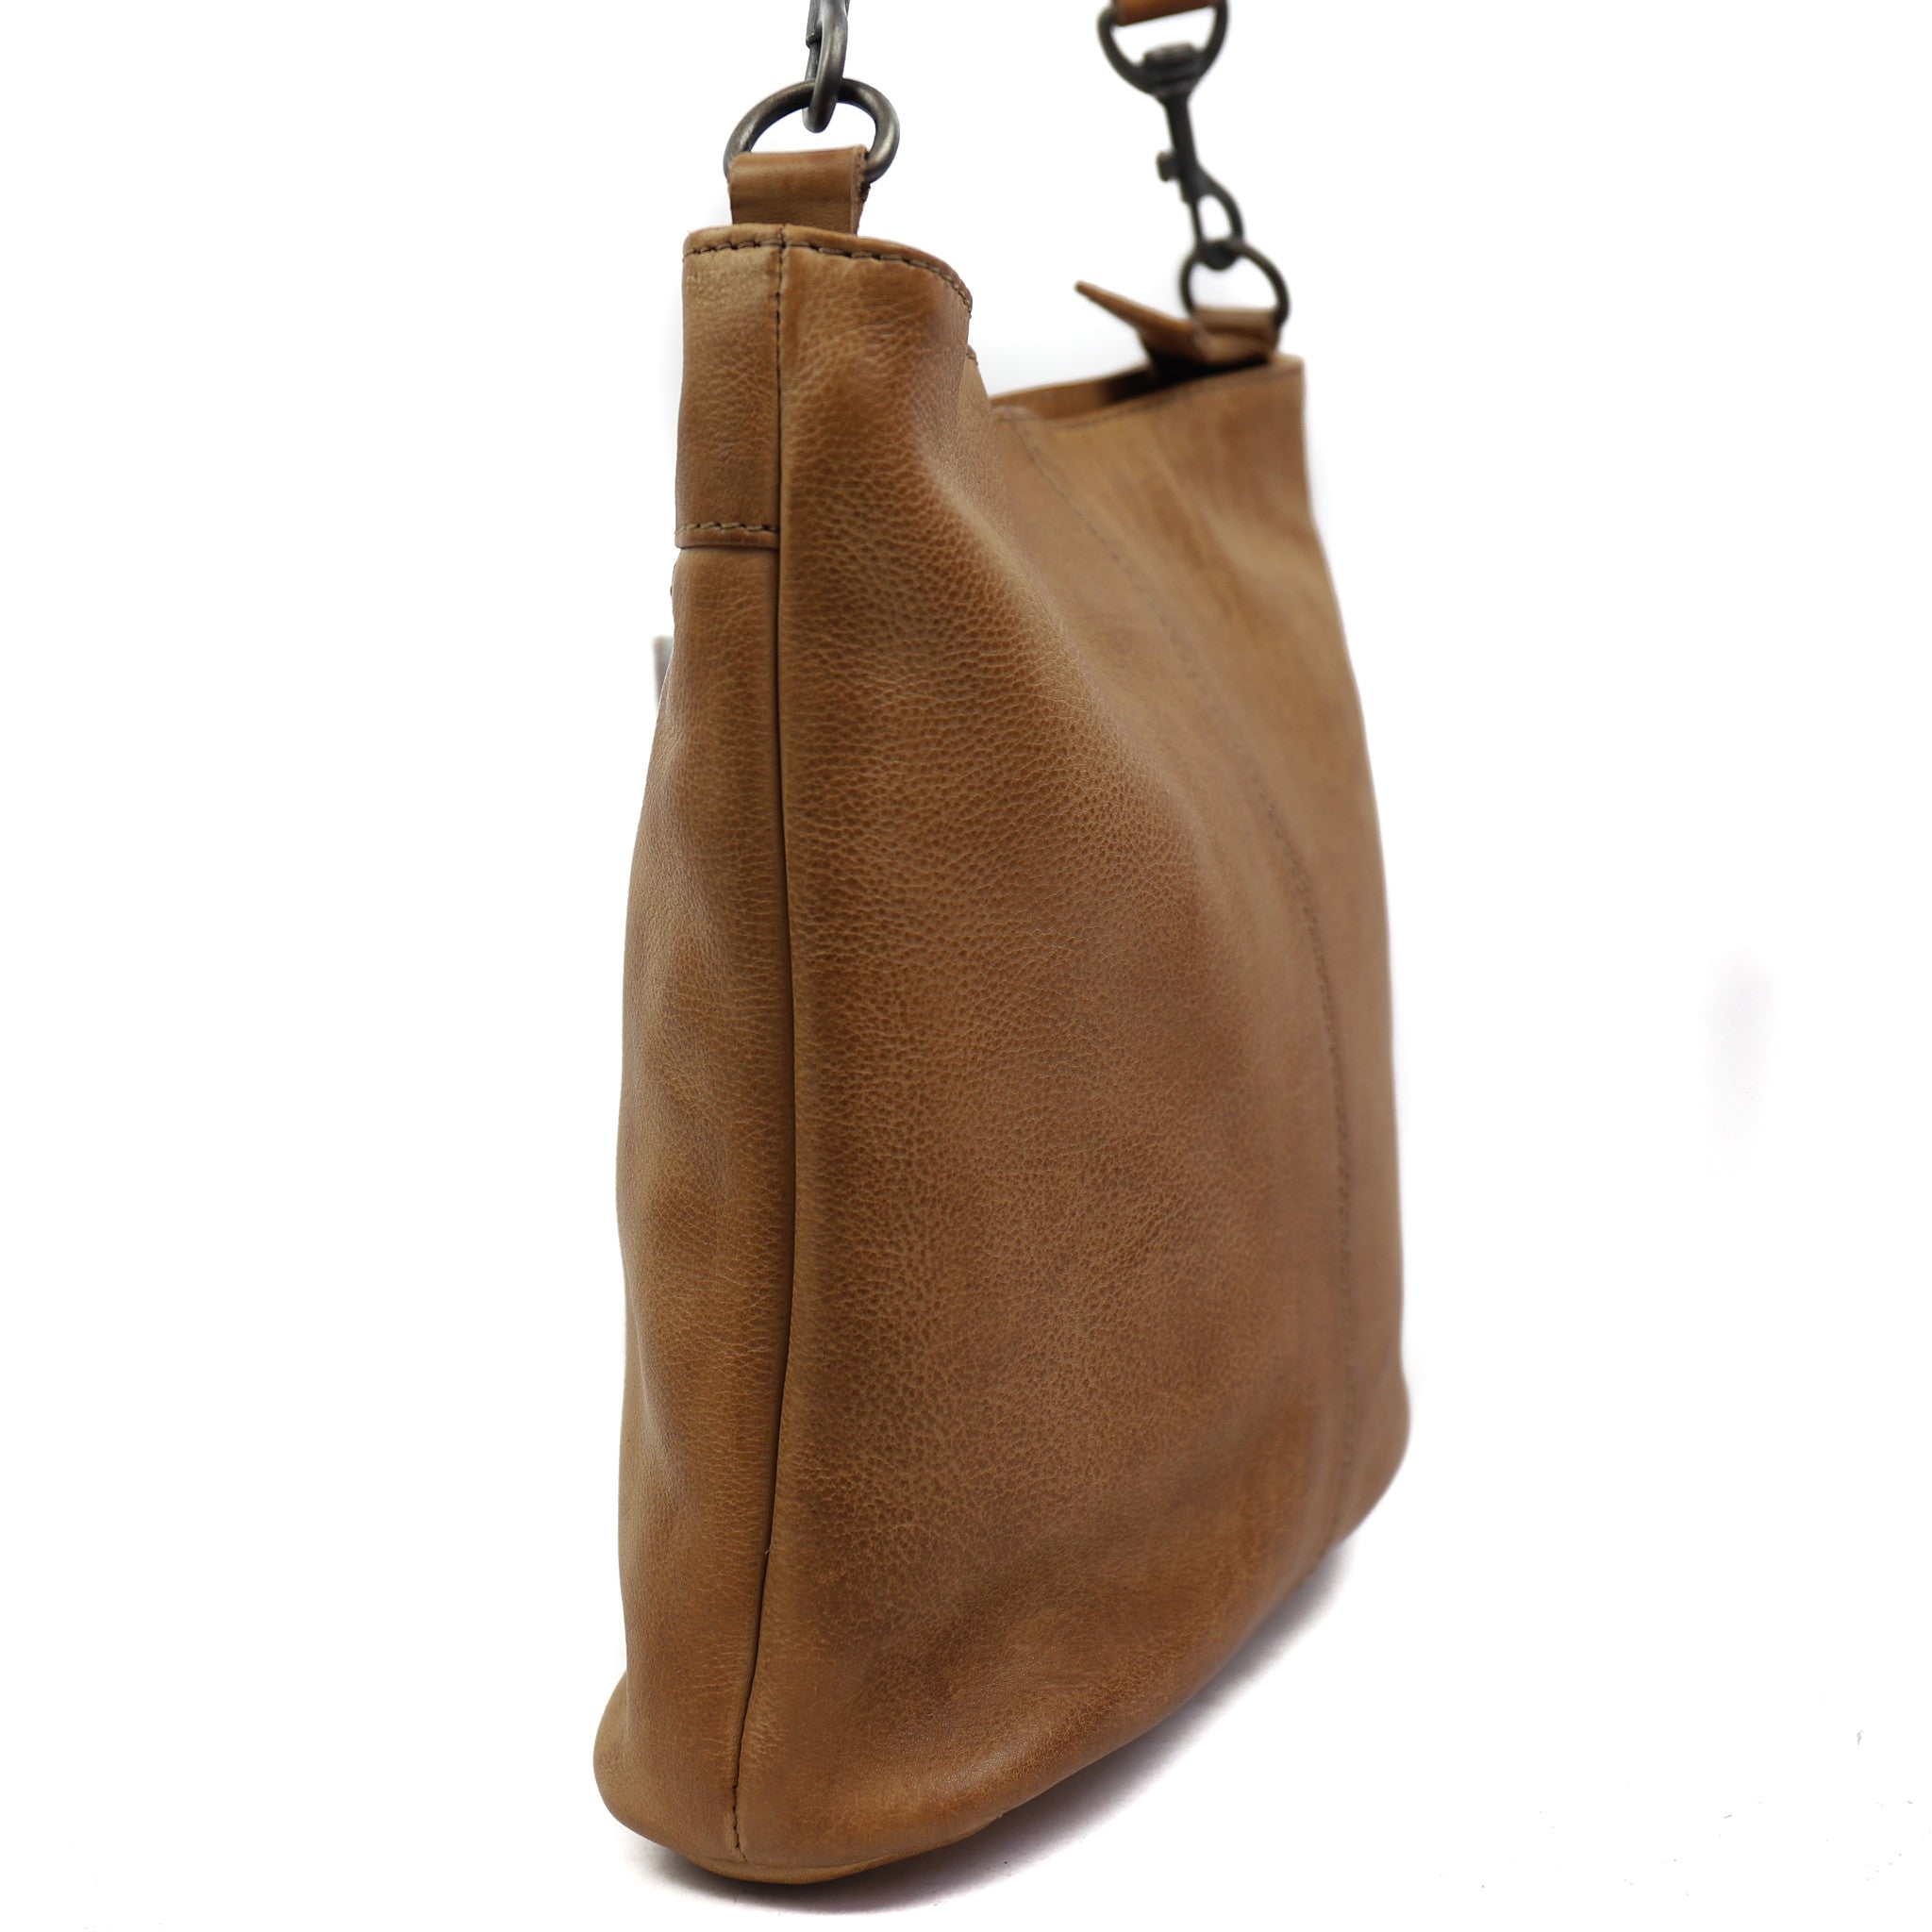 Pouch bag 'Caprica' taupe - CP 1297